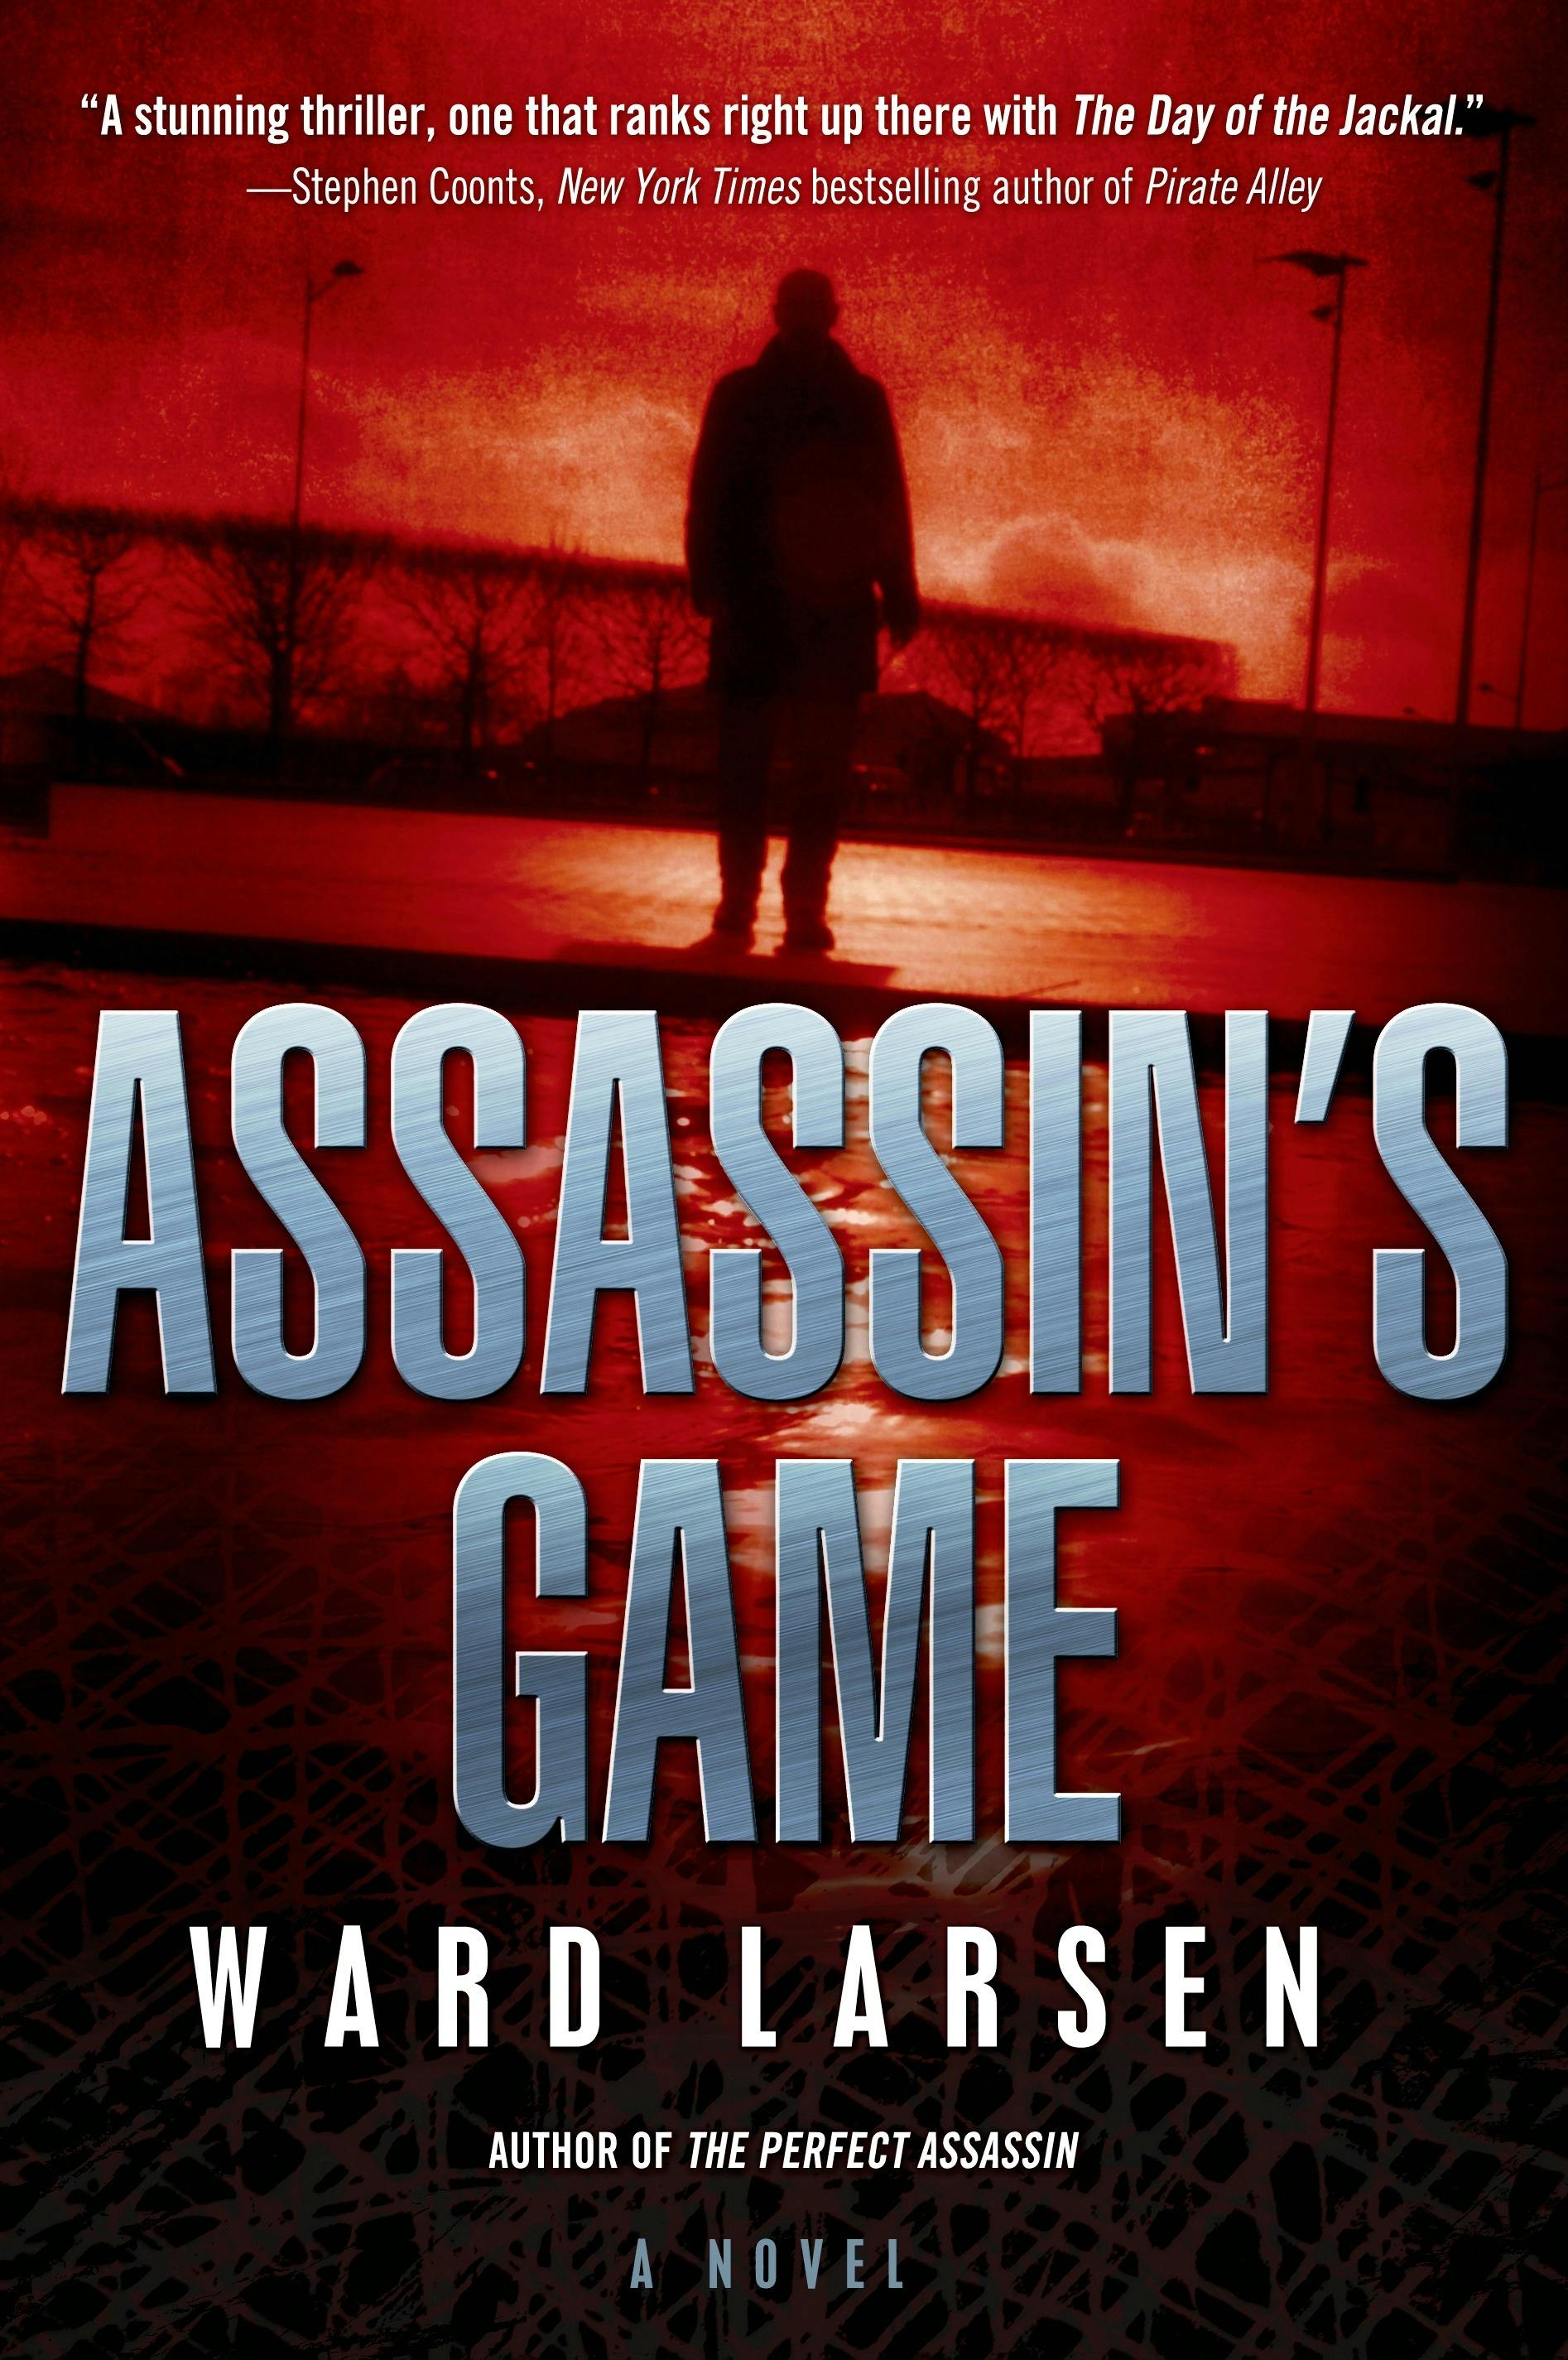 Cover for the book titled as: Assassin's Game